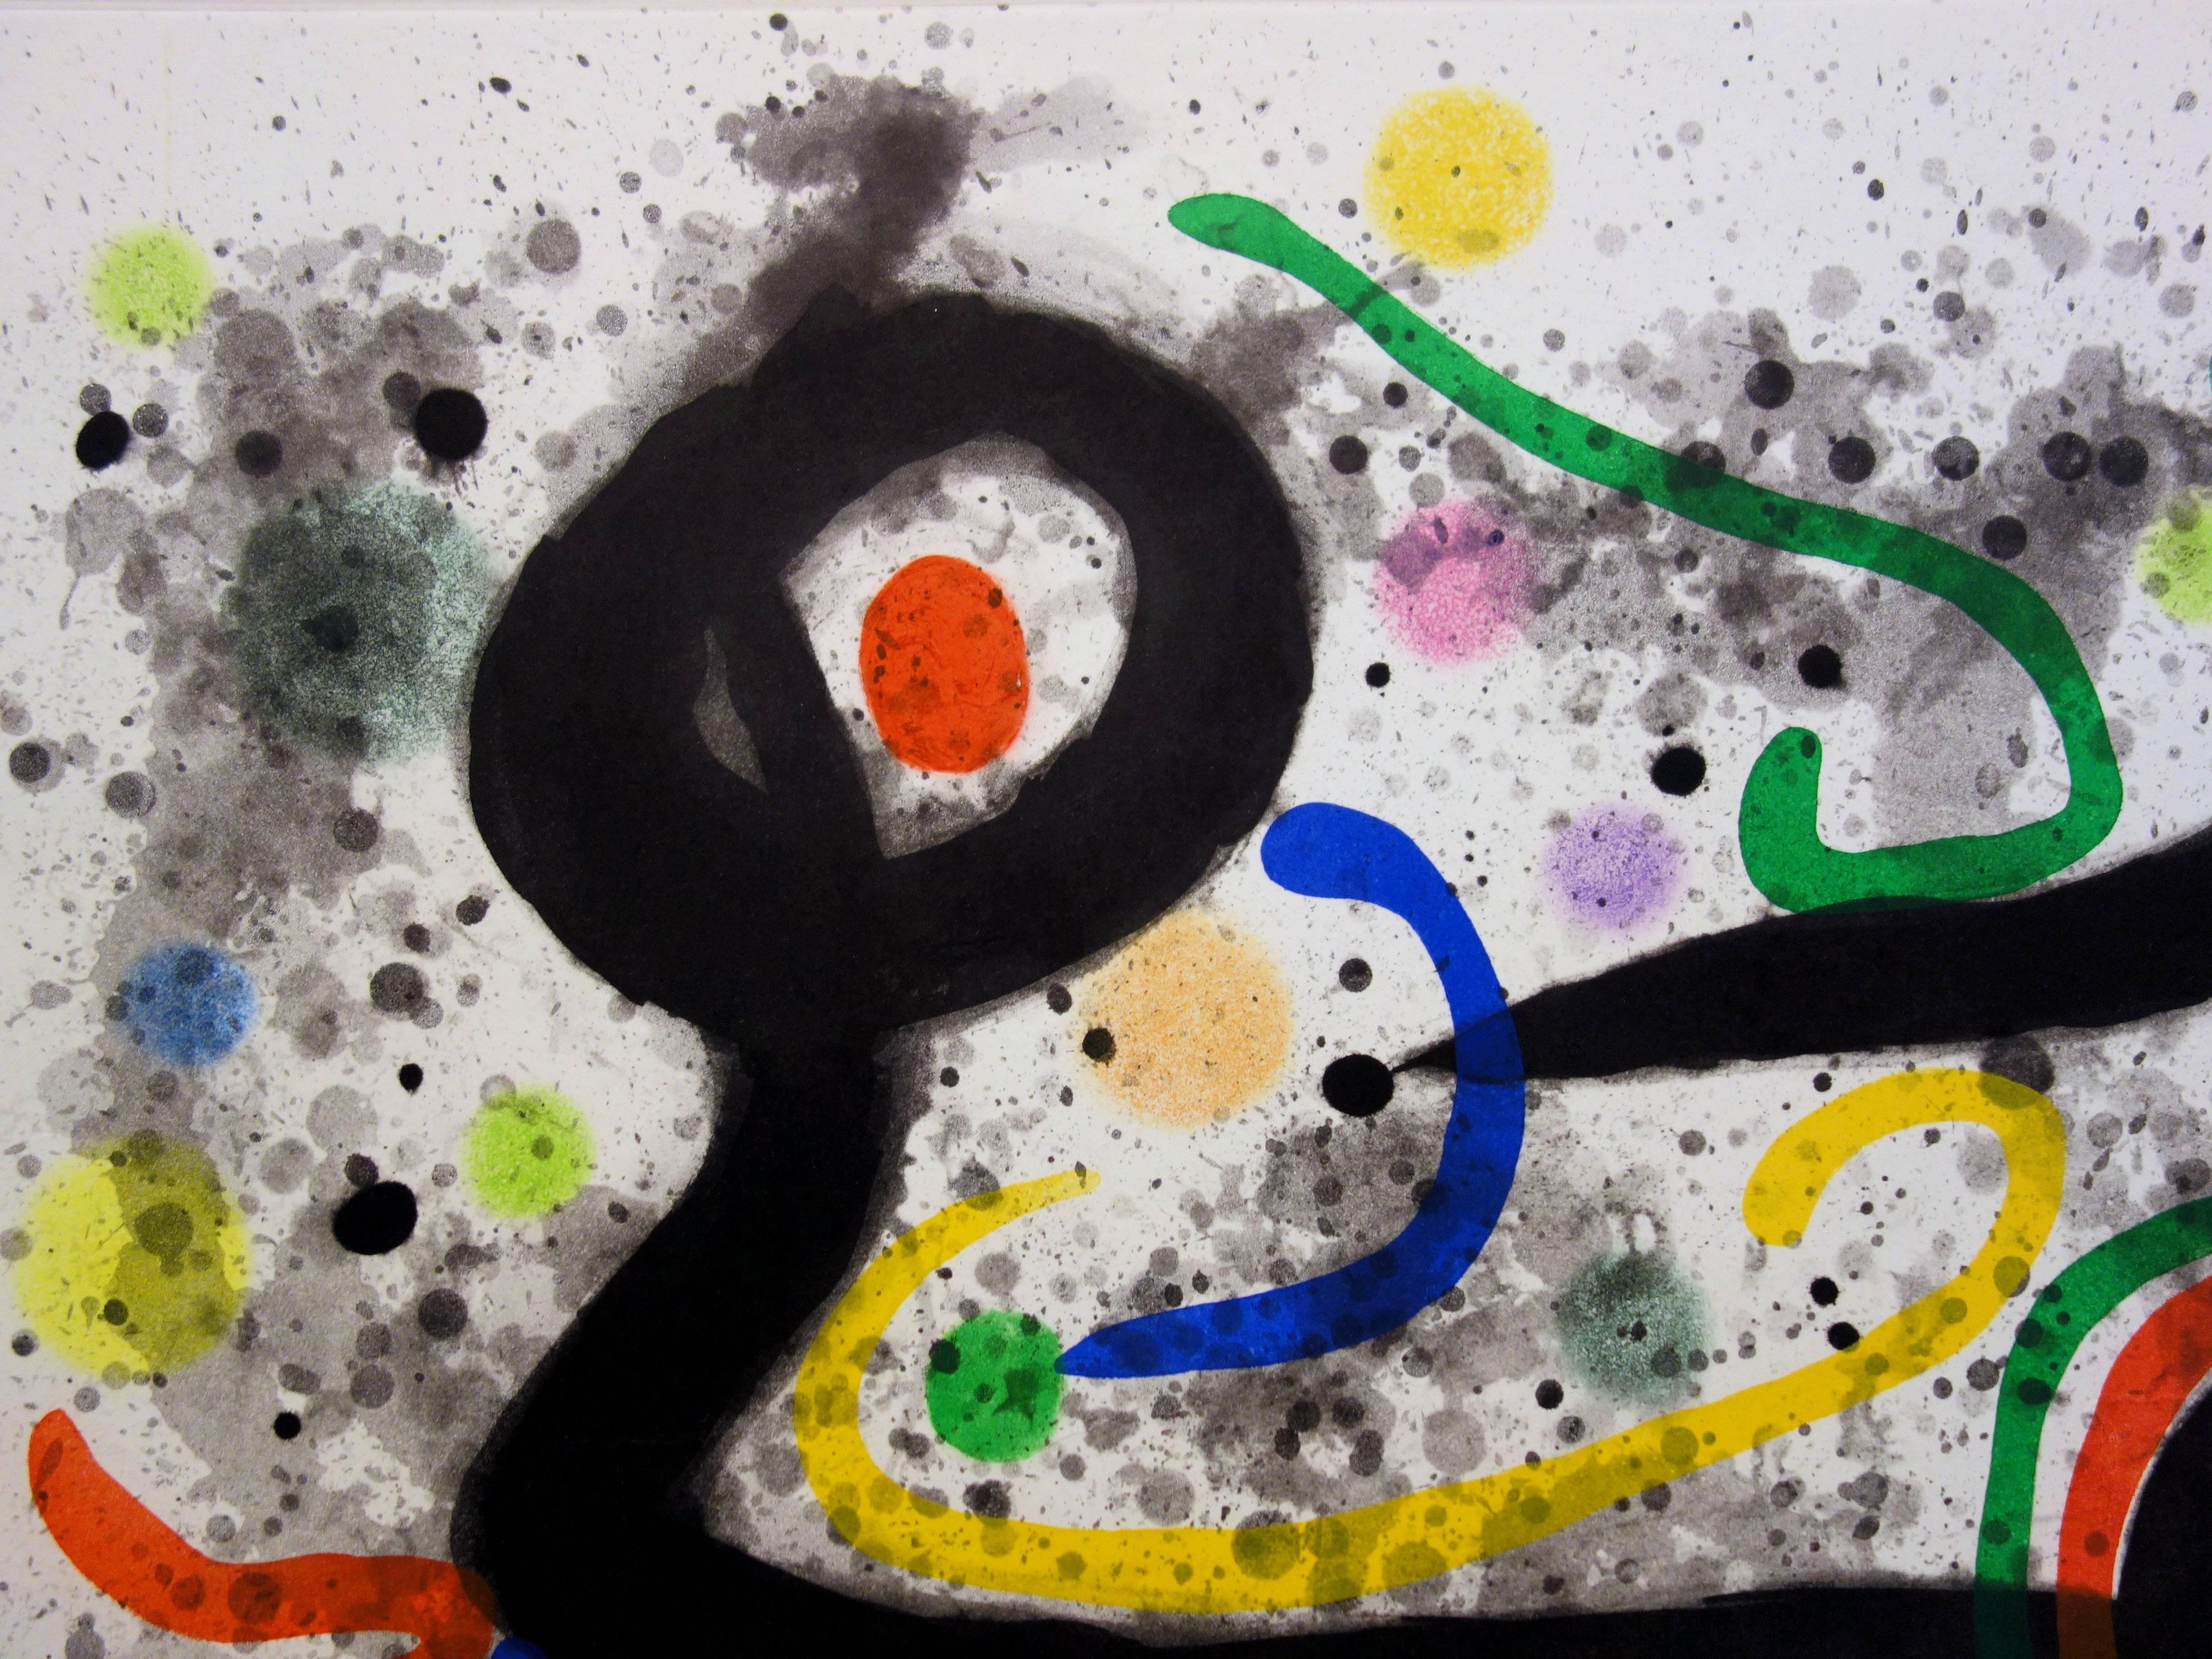 Joan MIRO
Sous la grele (Under the Storm), 1969

Original etching and aquatint
Pencil signed bottom left
Annotated HC (an hors commerce impression outside of the edition of  75)
On Mandeure vellum 62 x 89.5 cm (c. 25 x 36 inch)

REFERENCES : Catalog